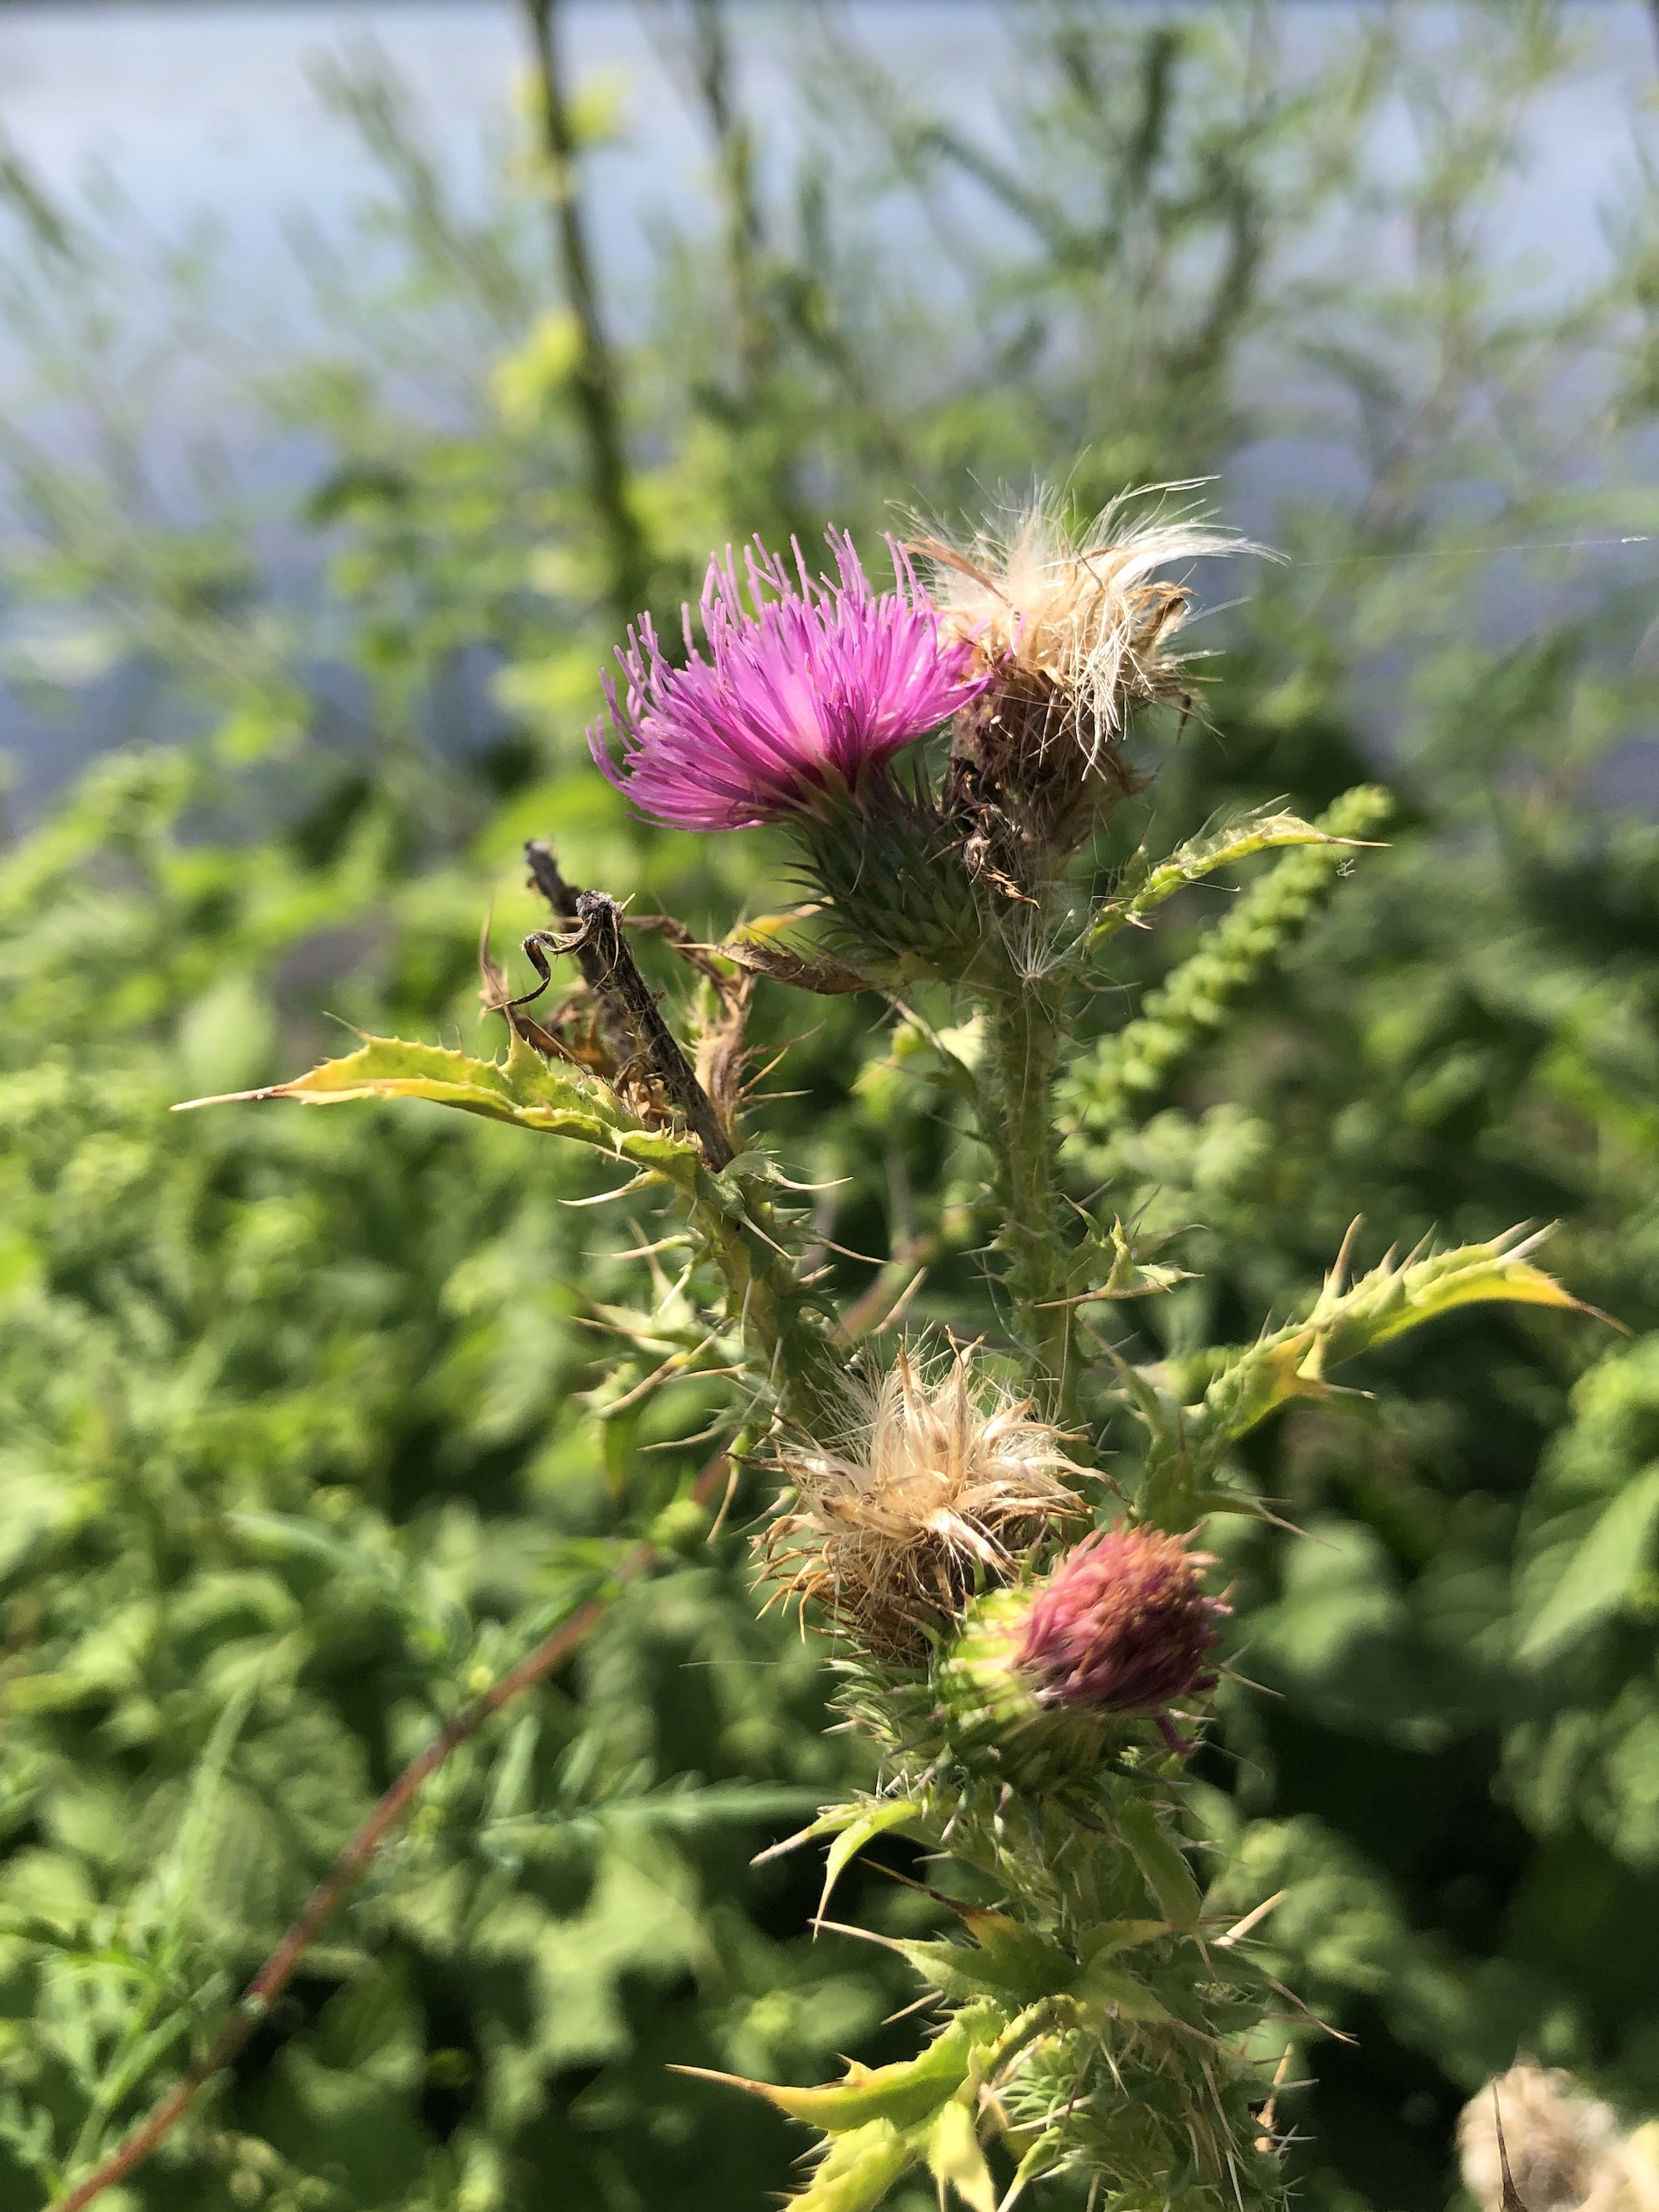 Plumeless Thistle on shore of Lake Wingra in Vilas Park in Madison, Wisconsin on August 24, 2022.